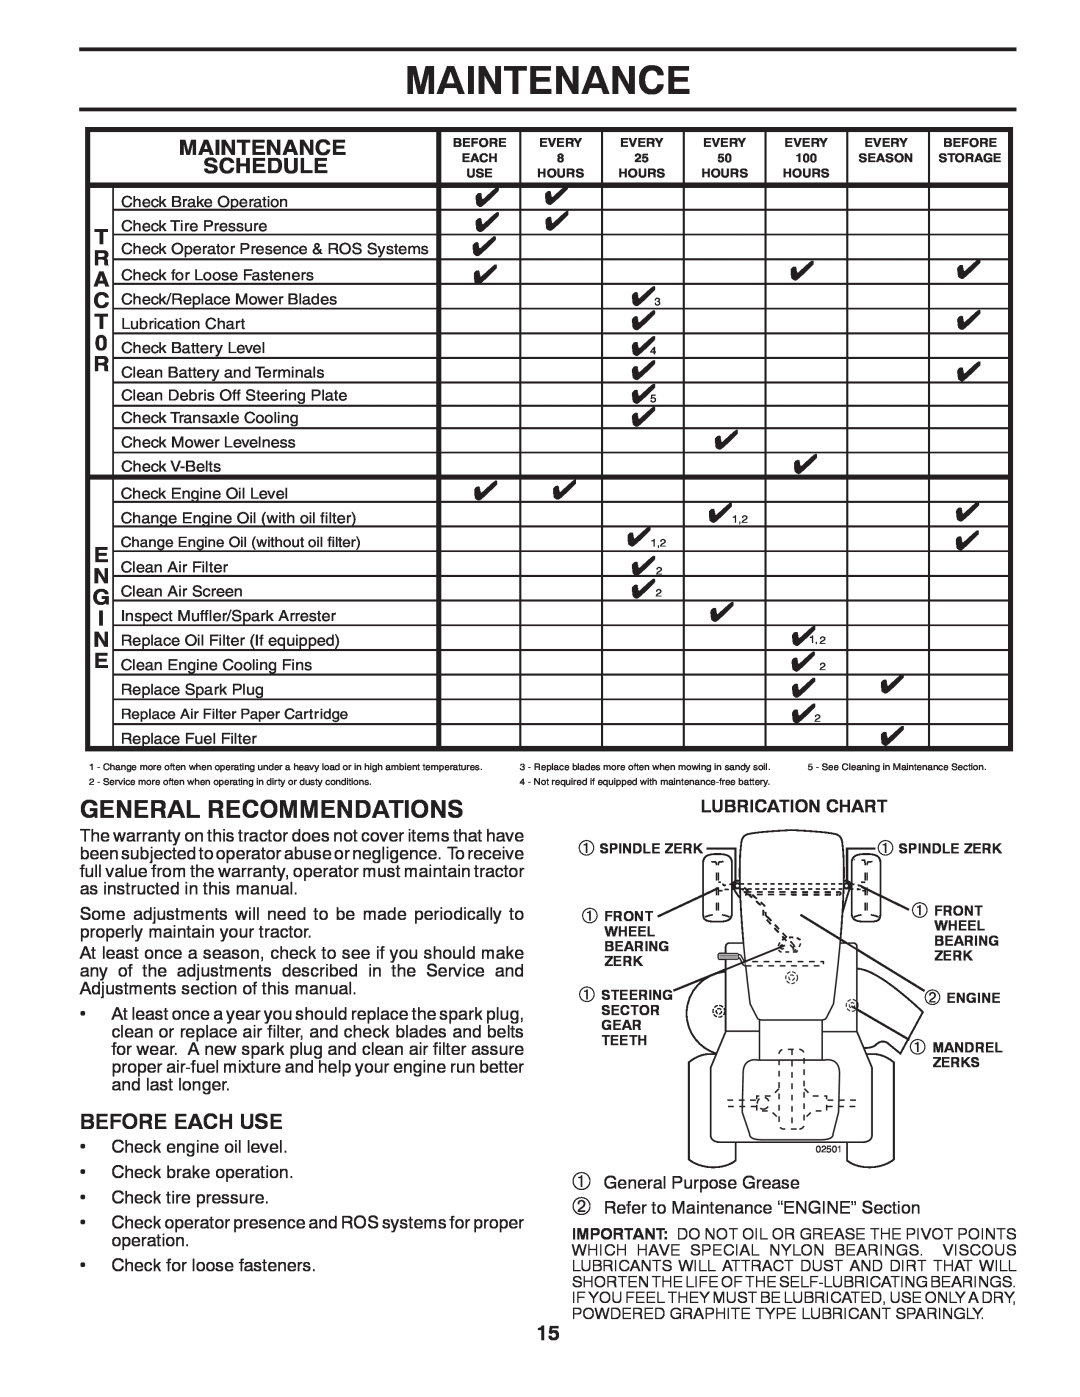 Dixon D26KH54 manual Maintenance, General Recommendations, Schedule, Before Each Use 